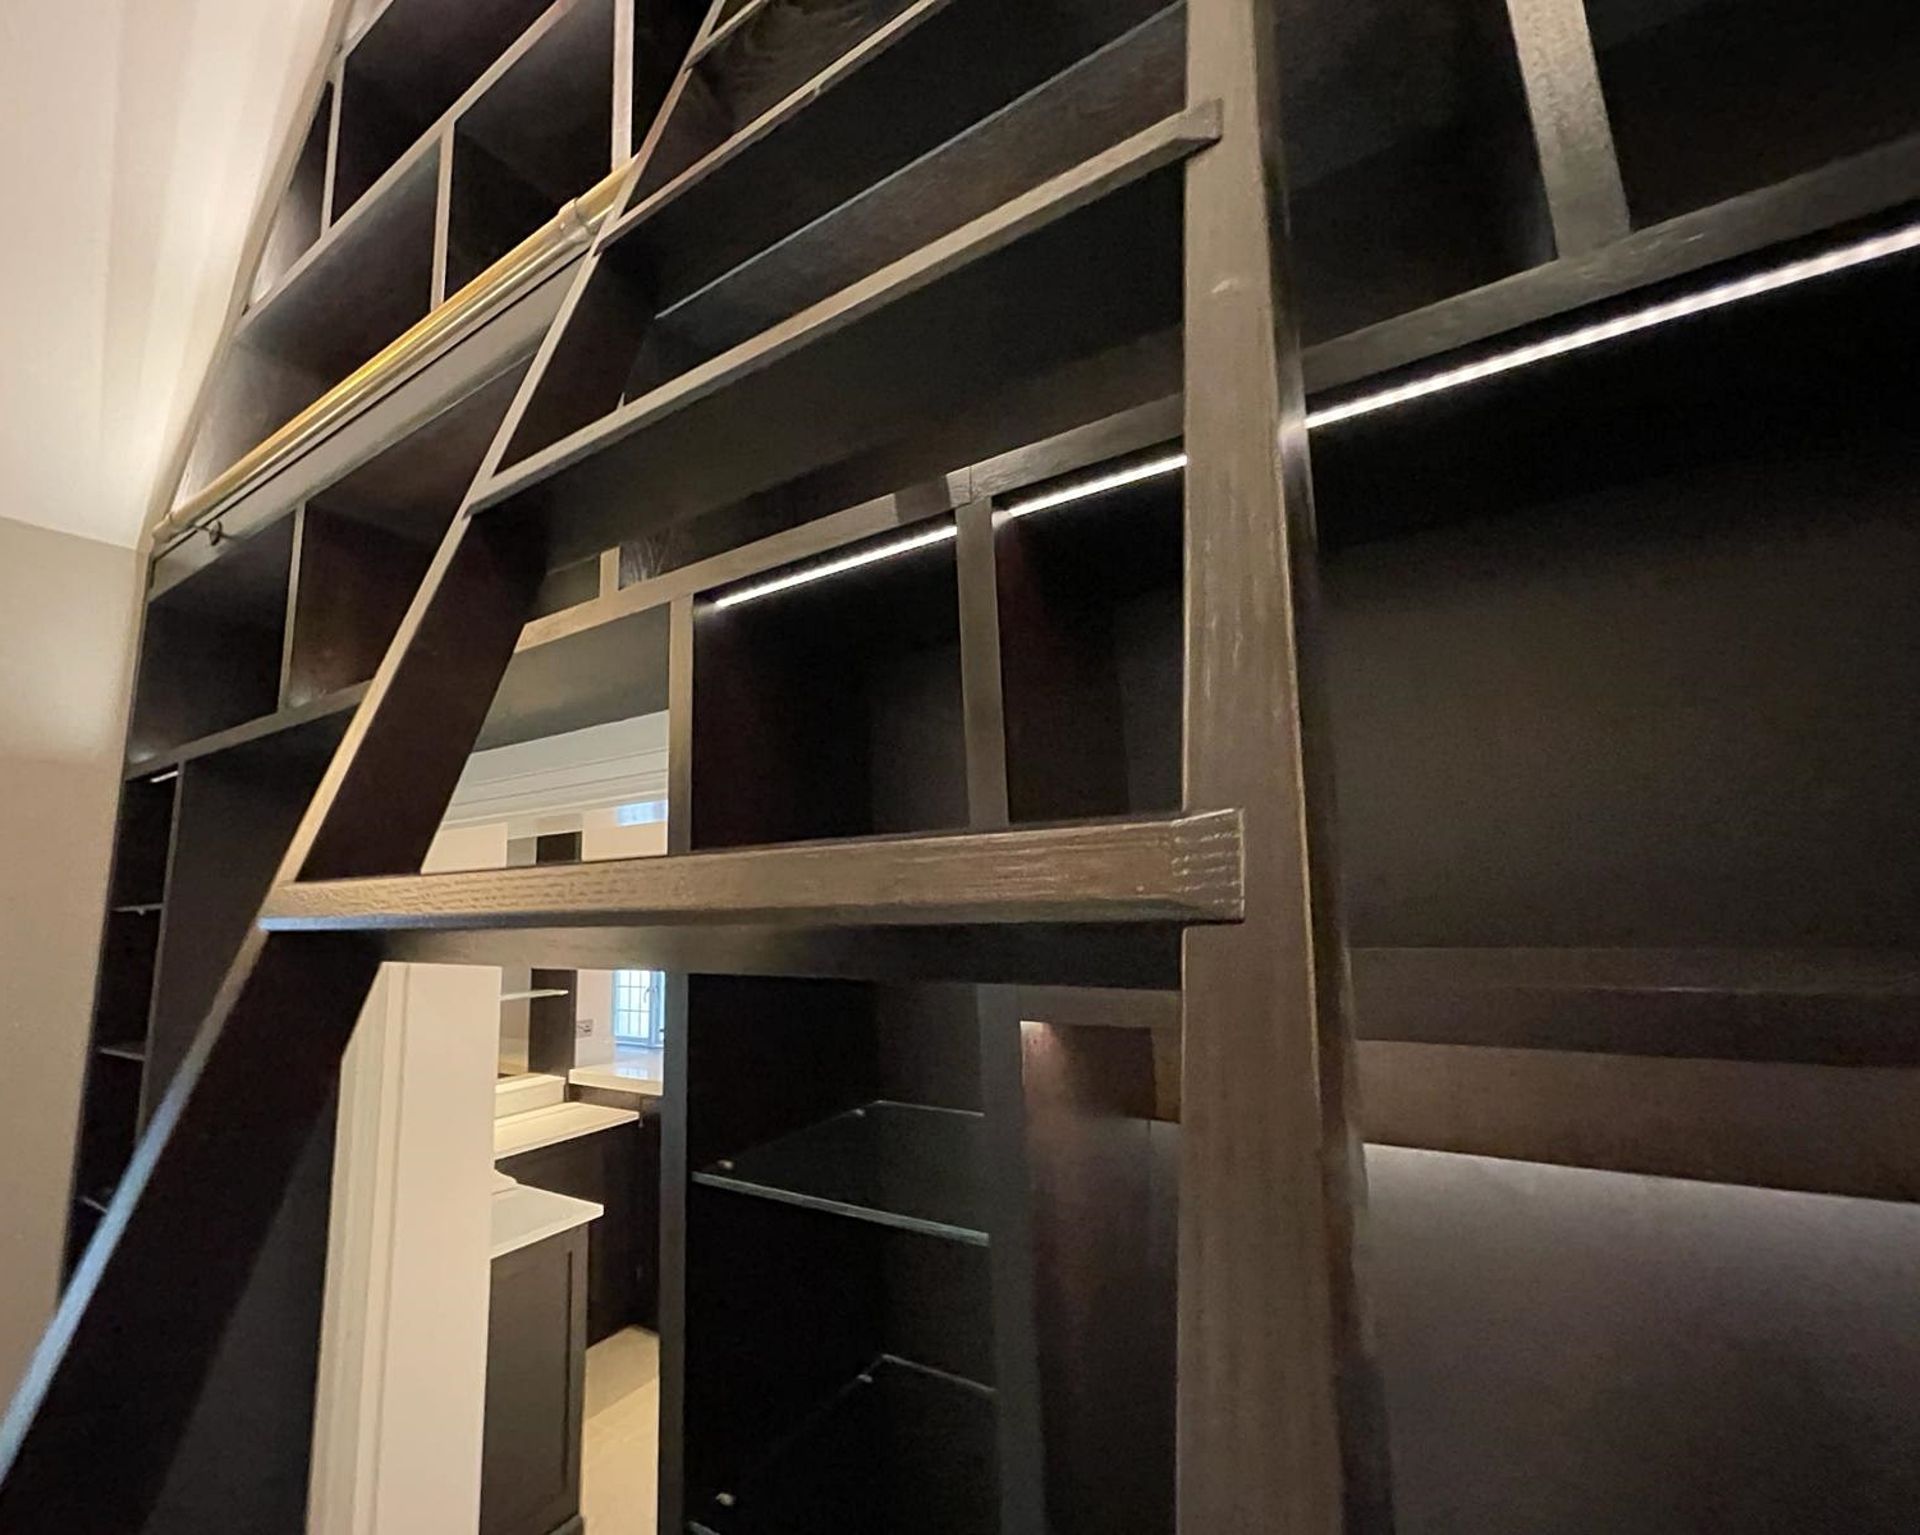 1 x Bespoke 4.7-Metre Wide Fitted Luxury Home Library Solid Wood Bookcase Wall Storage - Image 17 of 23